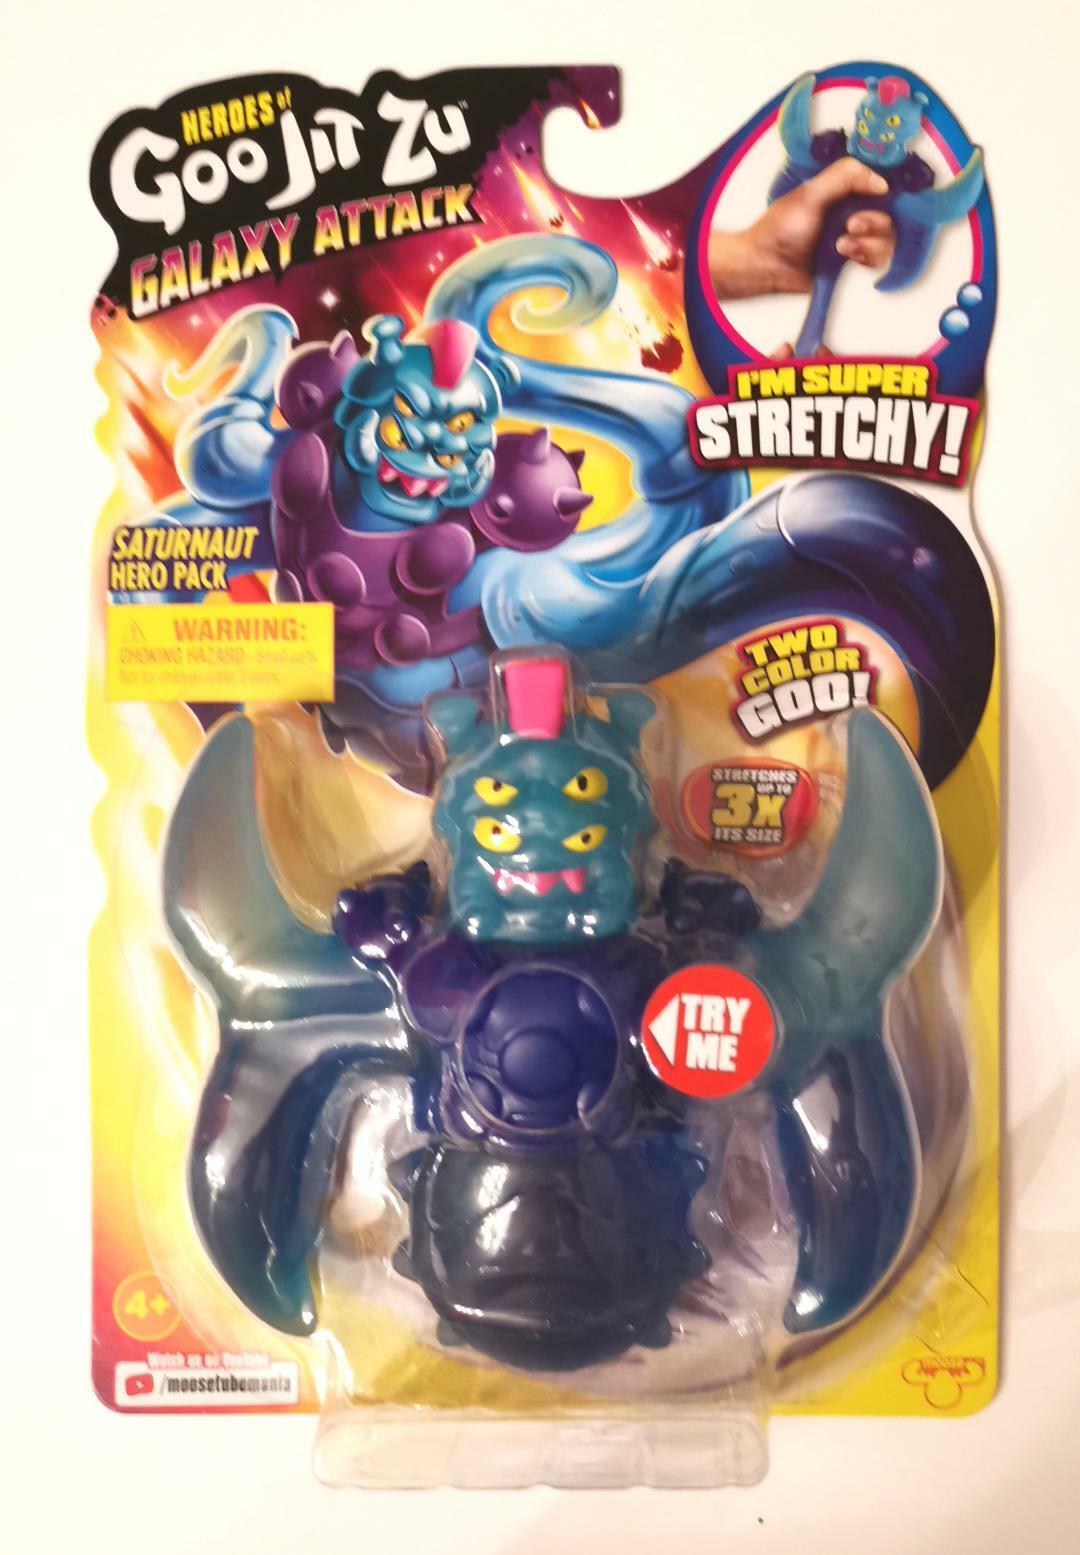 Moose Toys Heroes of Goo JIT Zu Galaxy Attack Saturnaut Action 